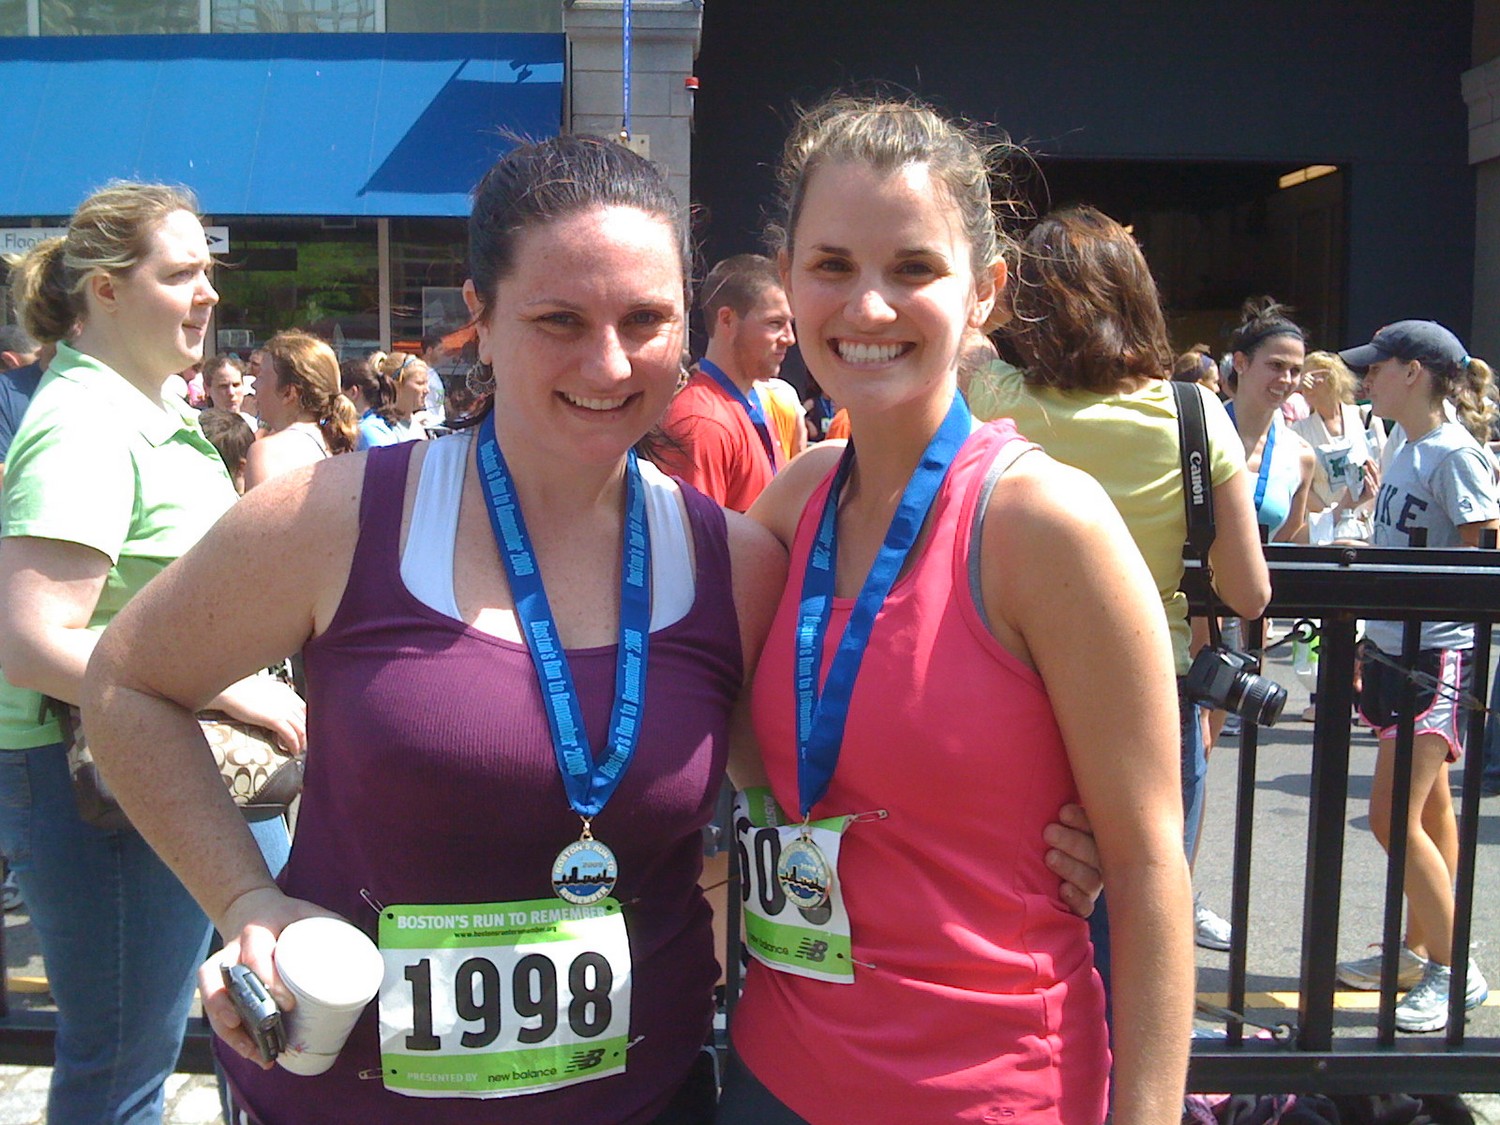 Tracie and I after Boston's Run to Remember Half Marathon